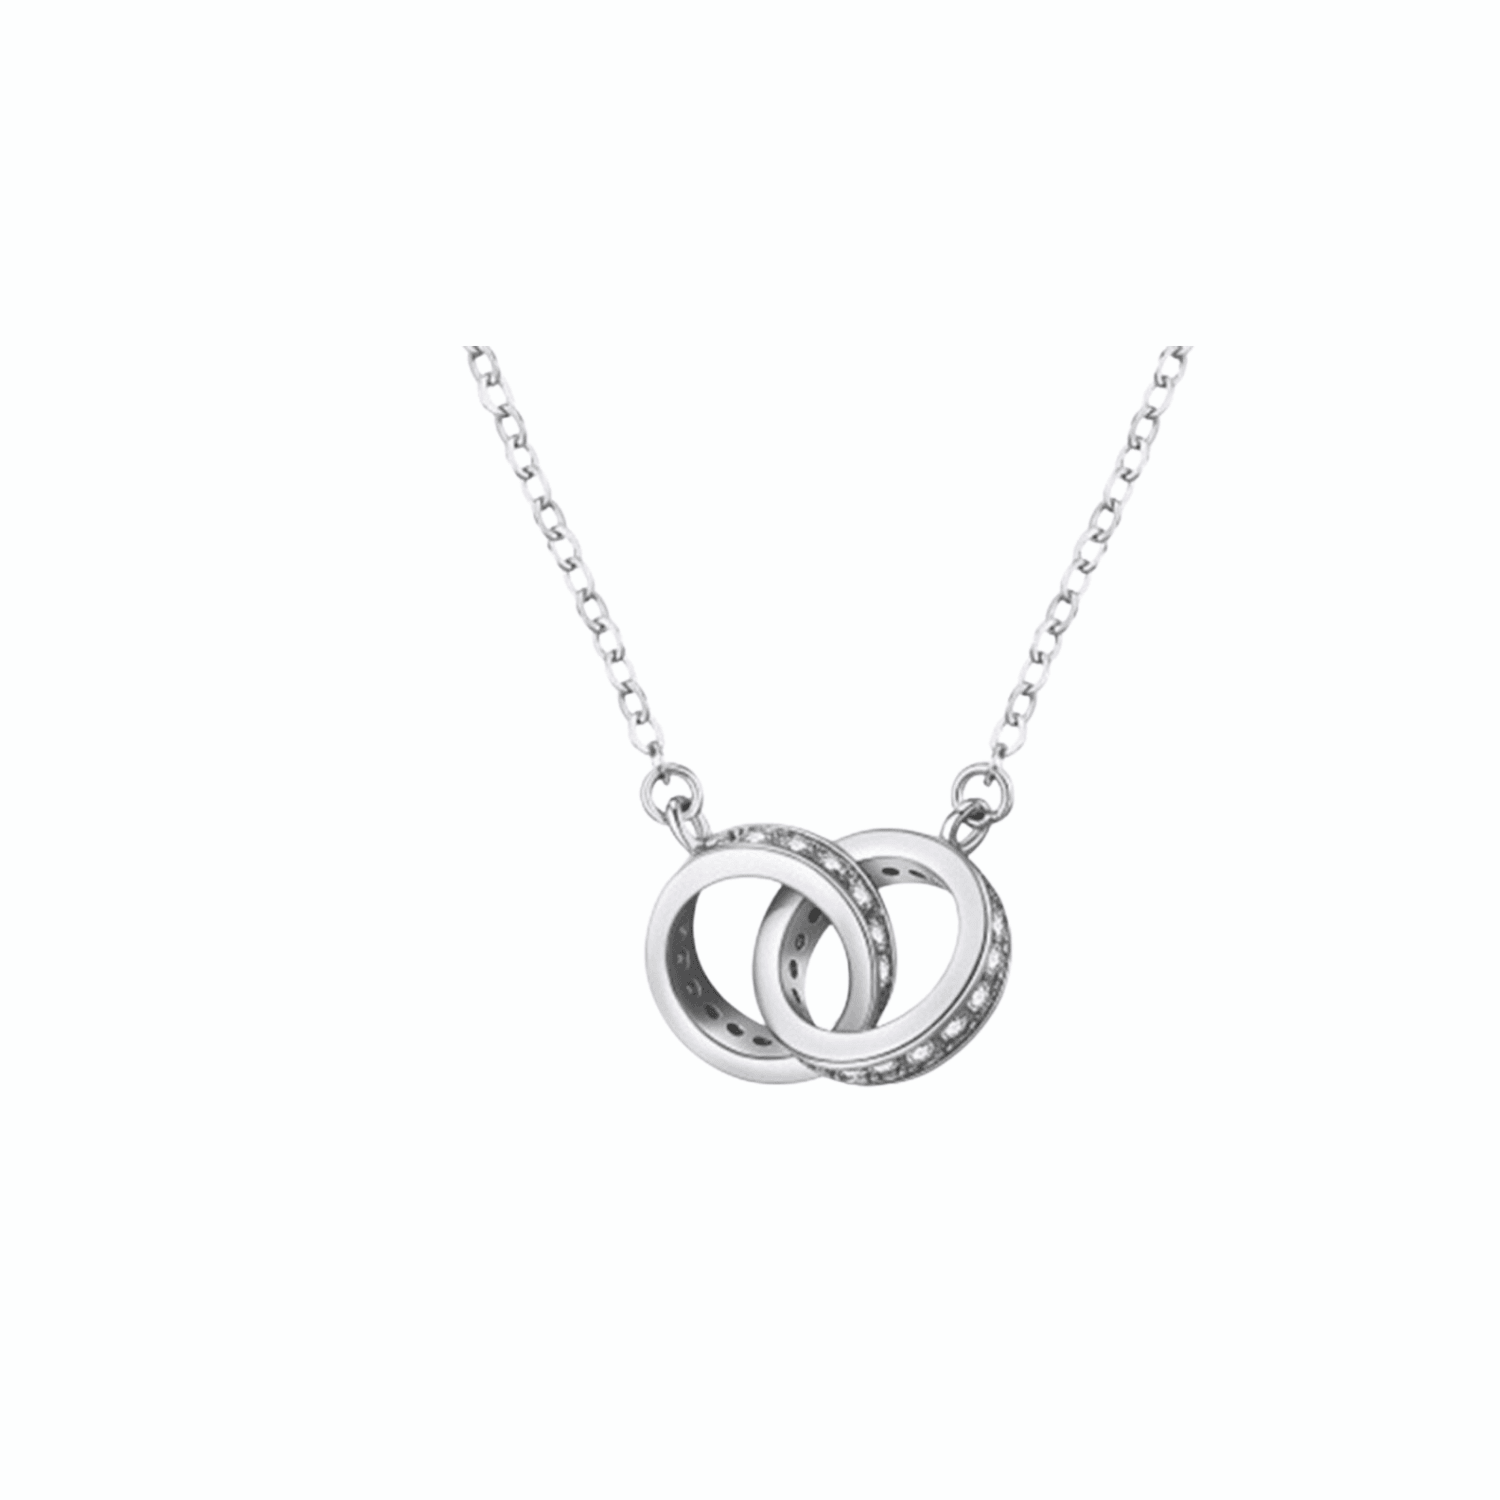 Two intertwined circle necklace - Sterling Silver overlay - J & S Expressions